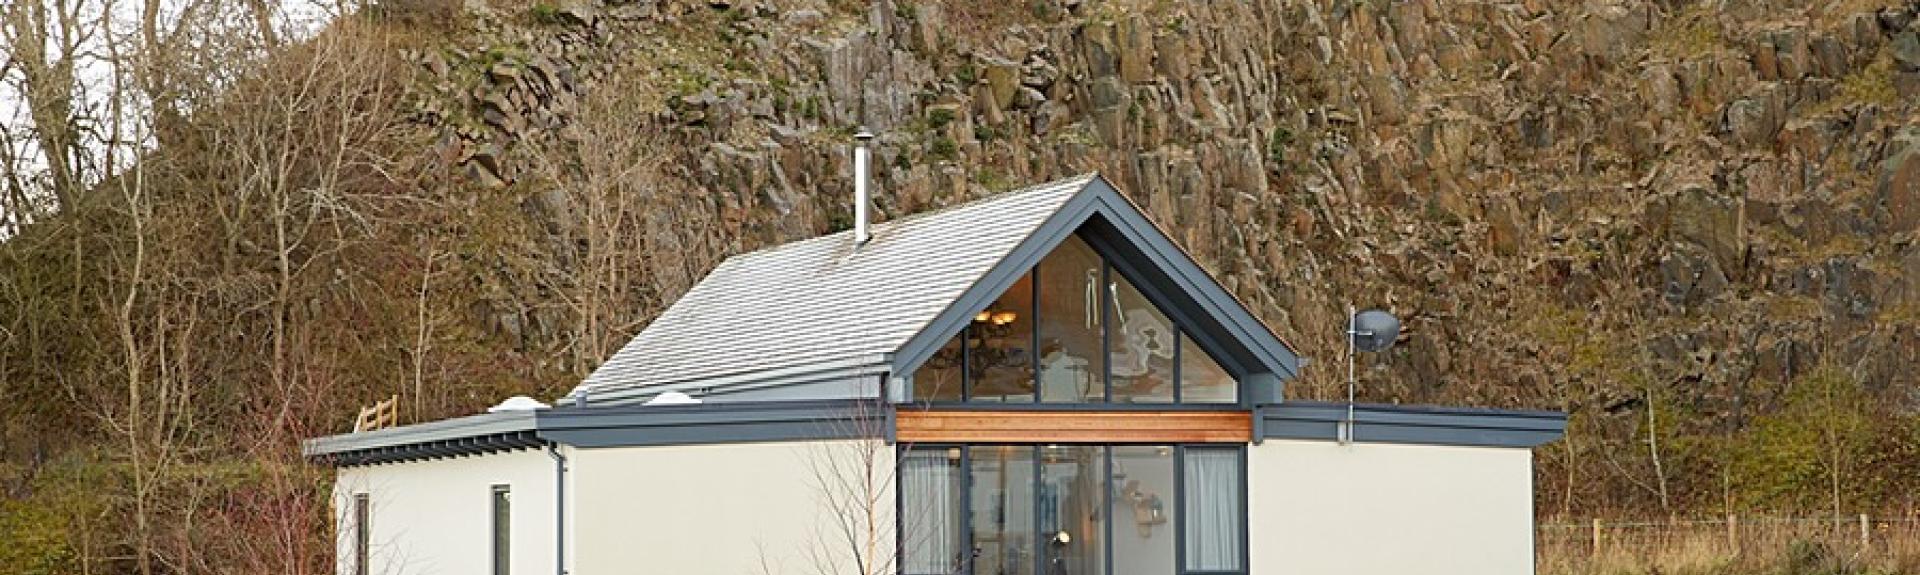 A contemporary Northumblerland holiday lodge beneath a sheer rocky hill face.